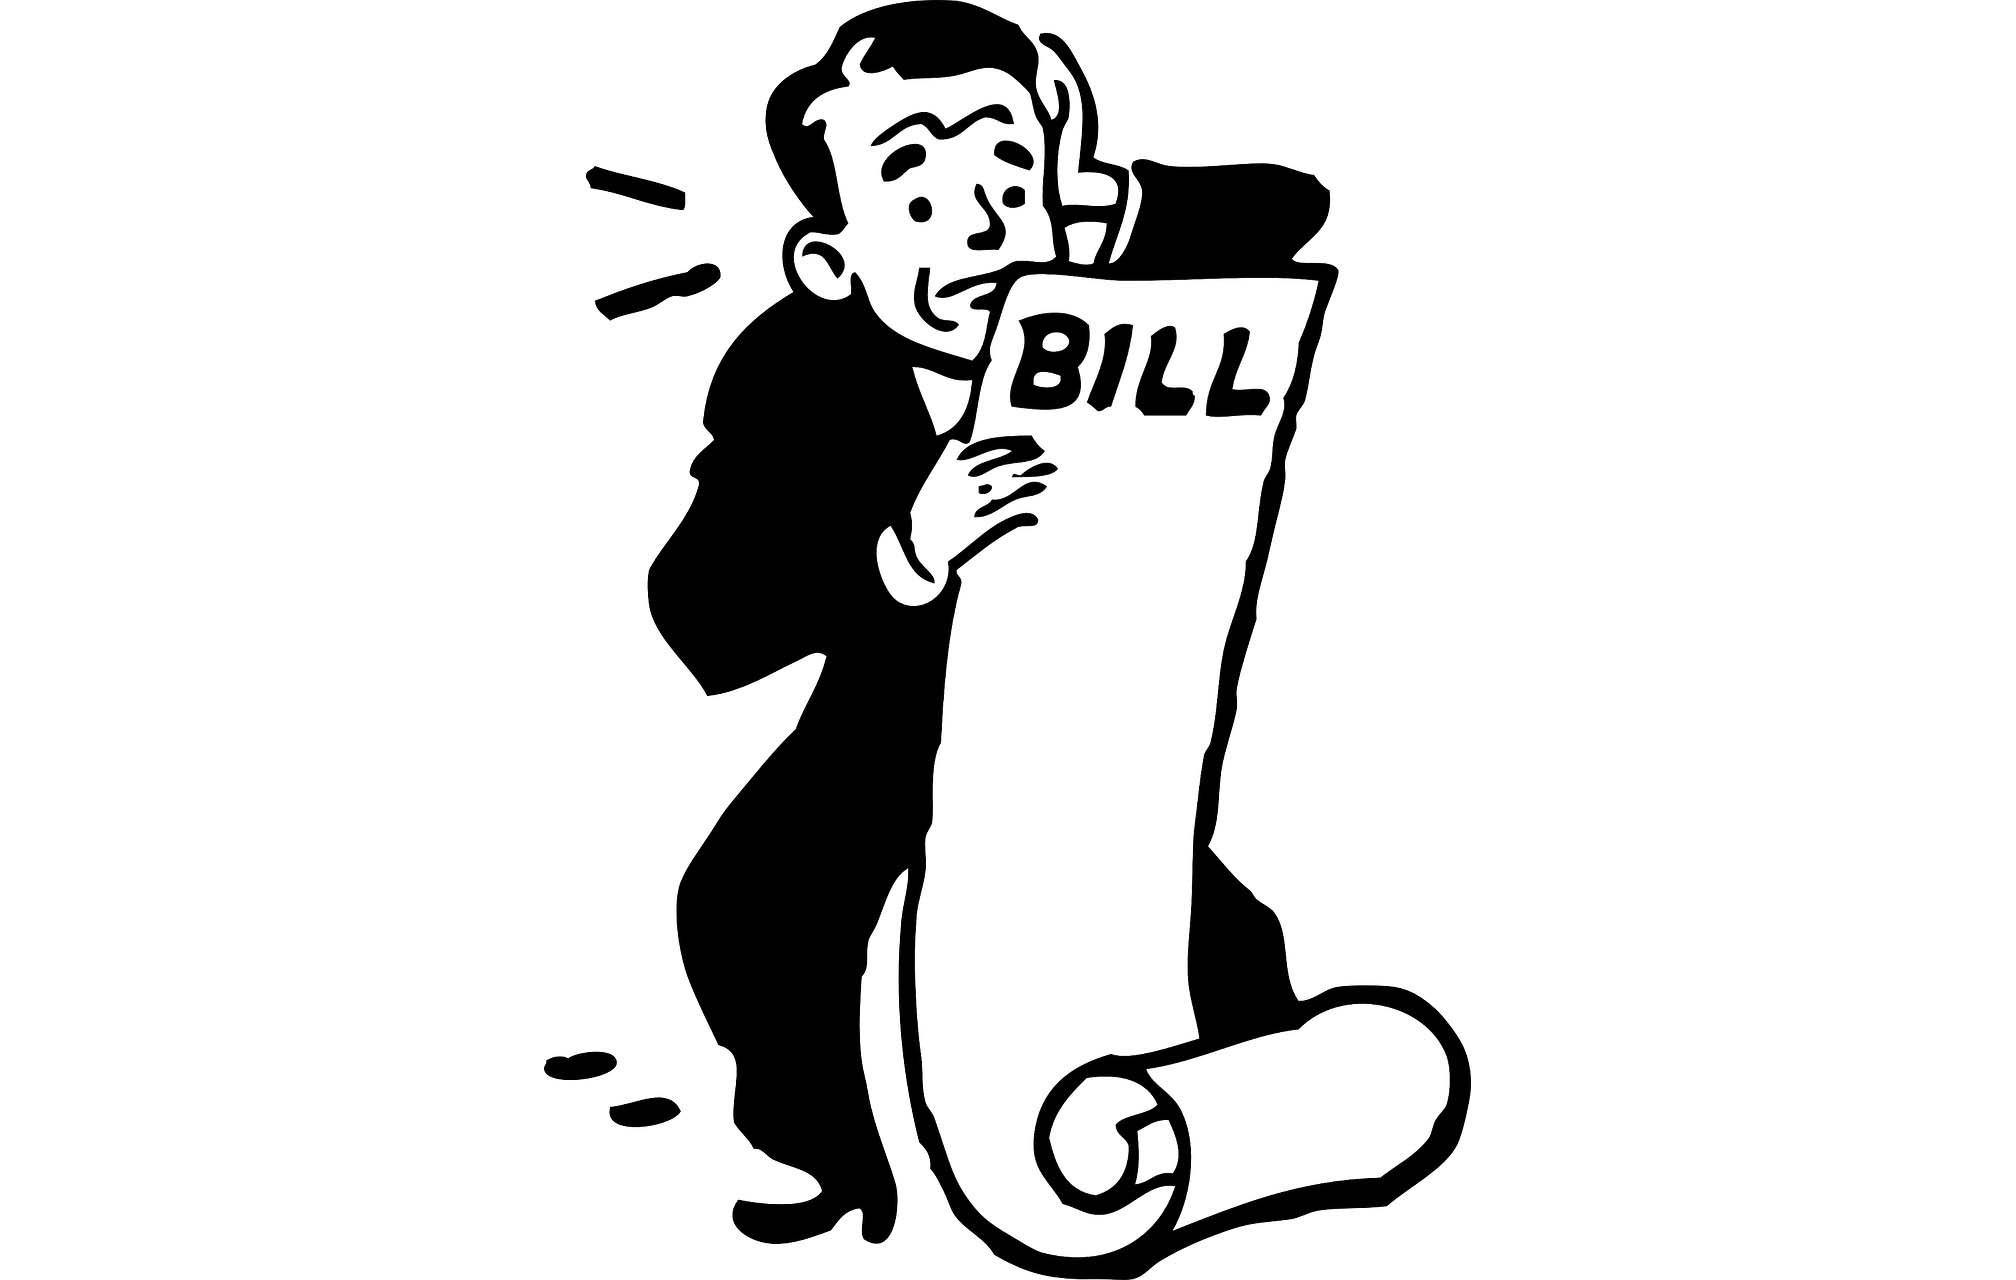 An illustration of a man shocked by a bill he owes.